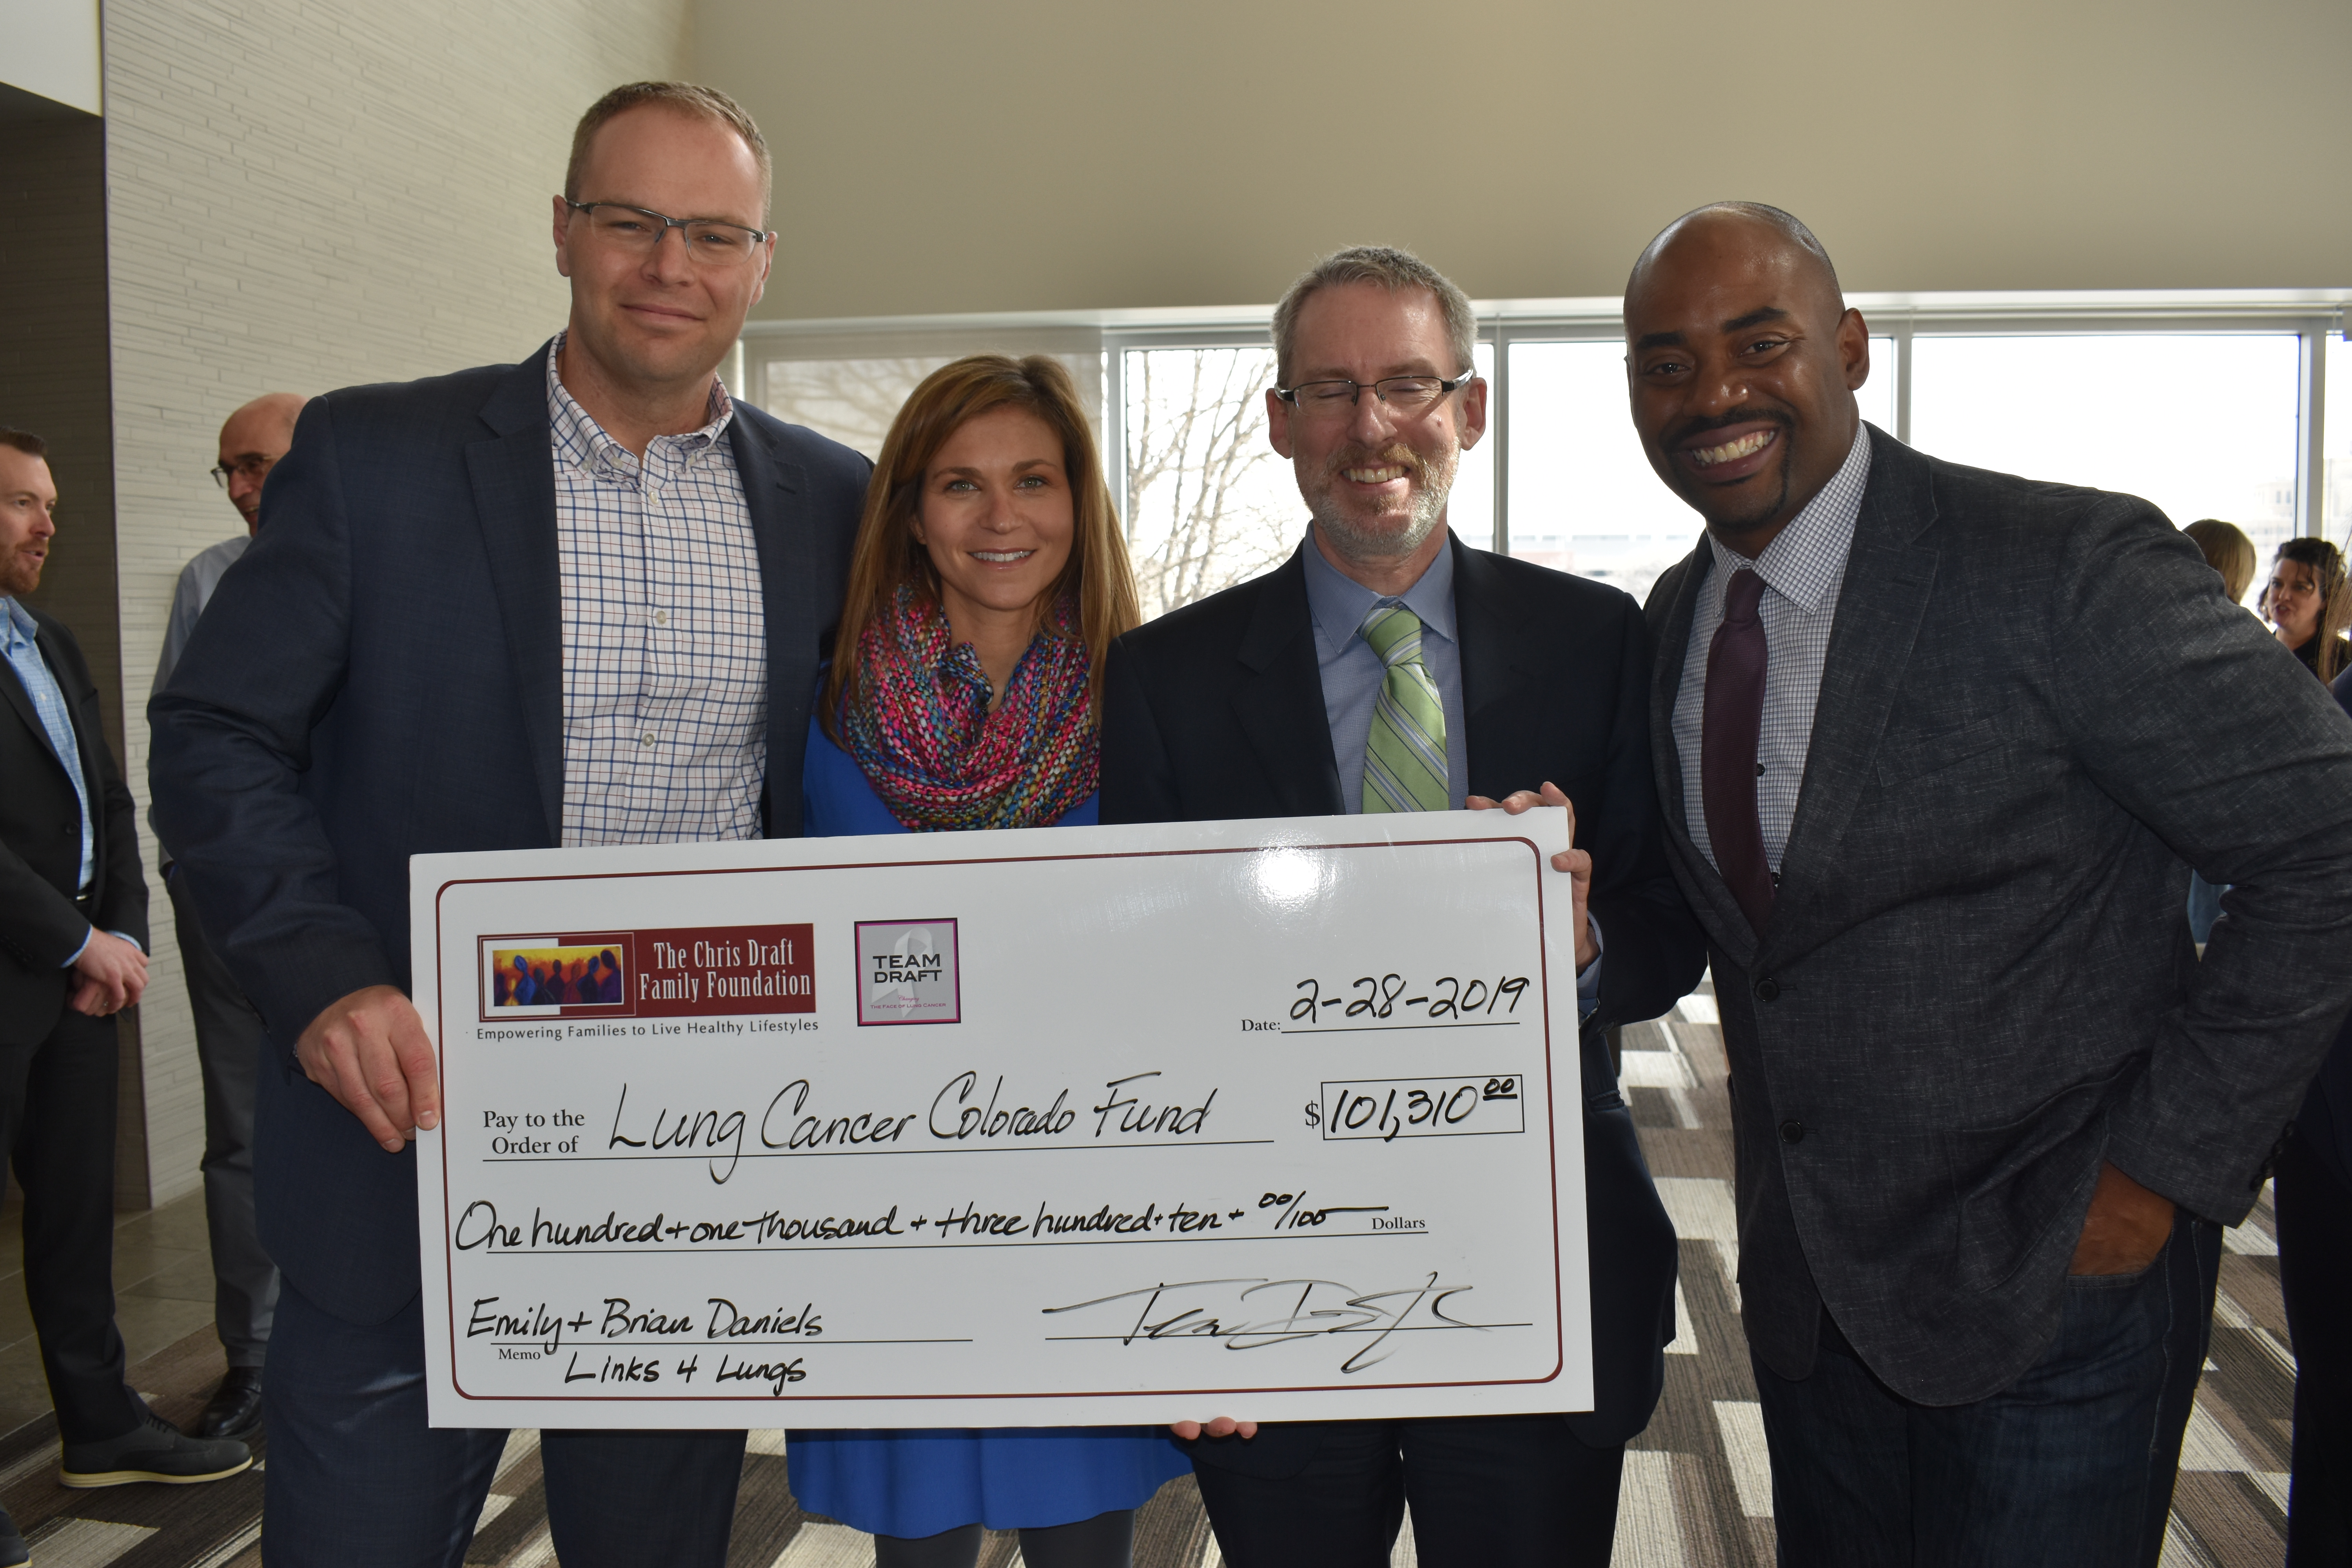 Emily and Brian Daniels Check Presentation to CU Cancer Center #Links4Lungs